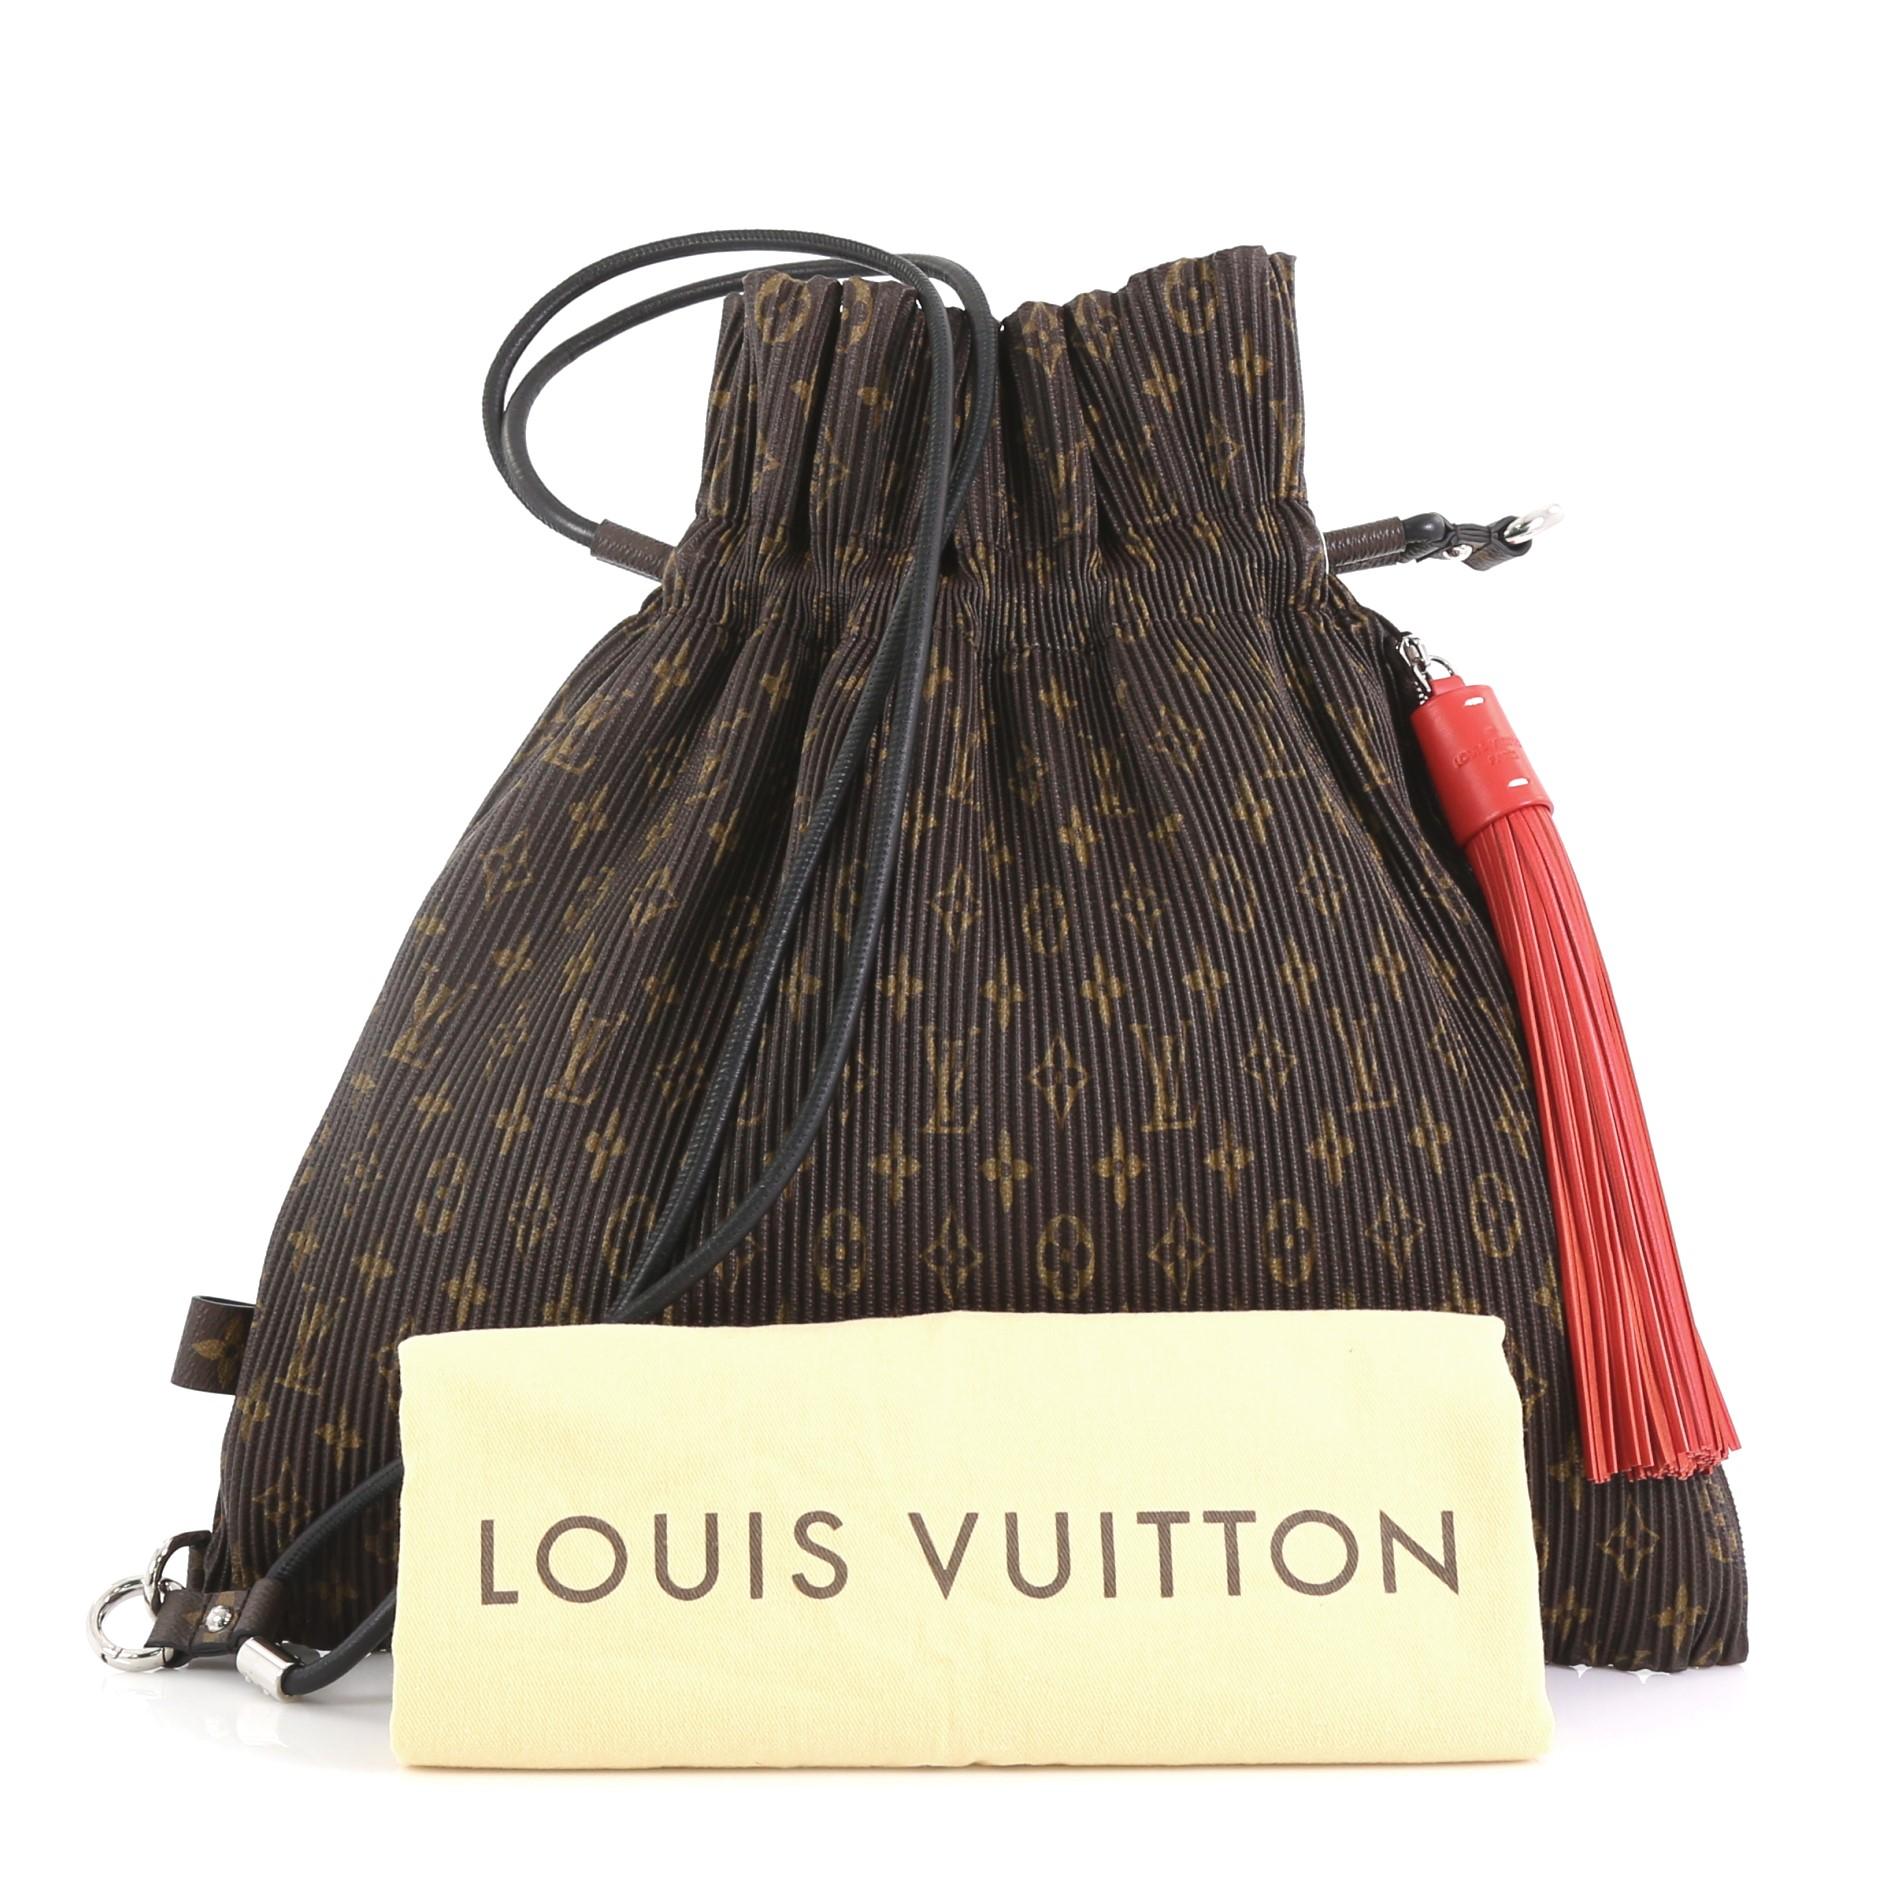 This Louis Vuitton Explorer Shoulder Bag Pleated Monogram Canvas MM, crafted in brown pleated monogram canvas, features a smooth leather shoulder strap, exterior side zip pocket with tassel charm, and silver-tone hardware. Its drawstring closure